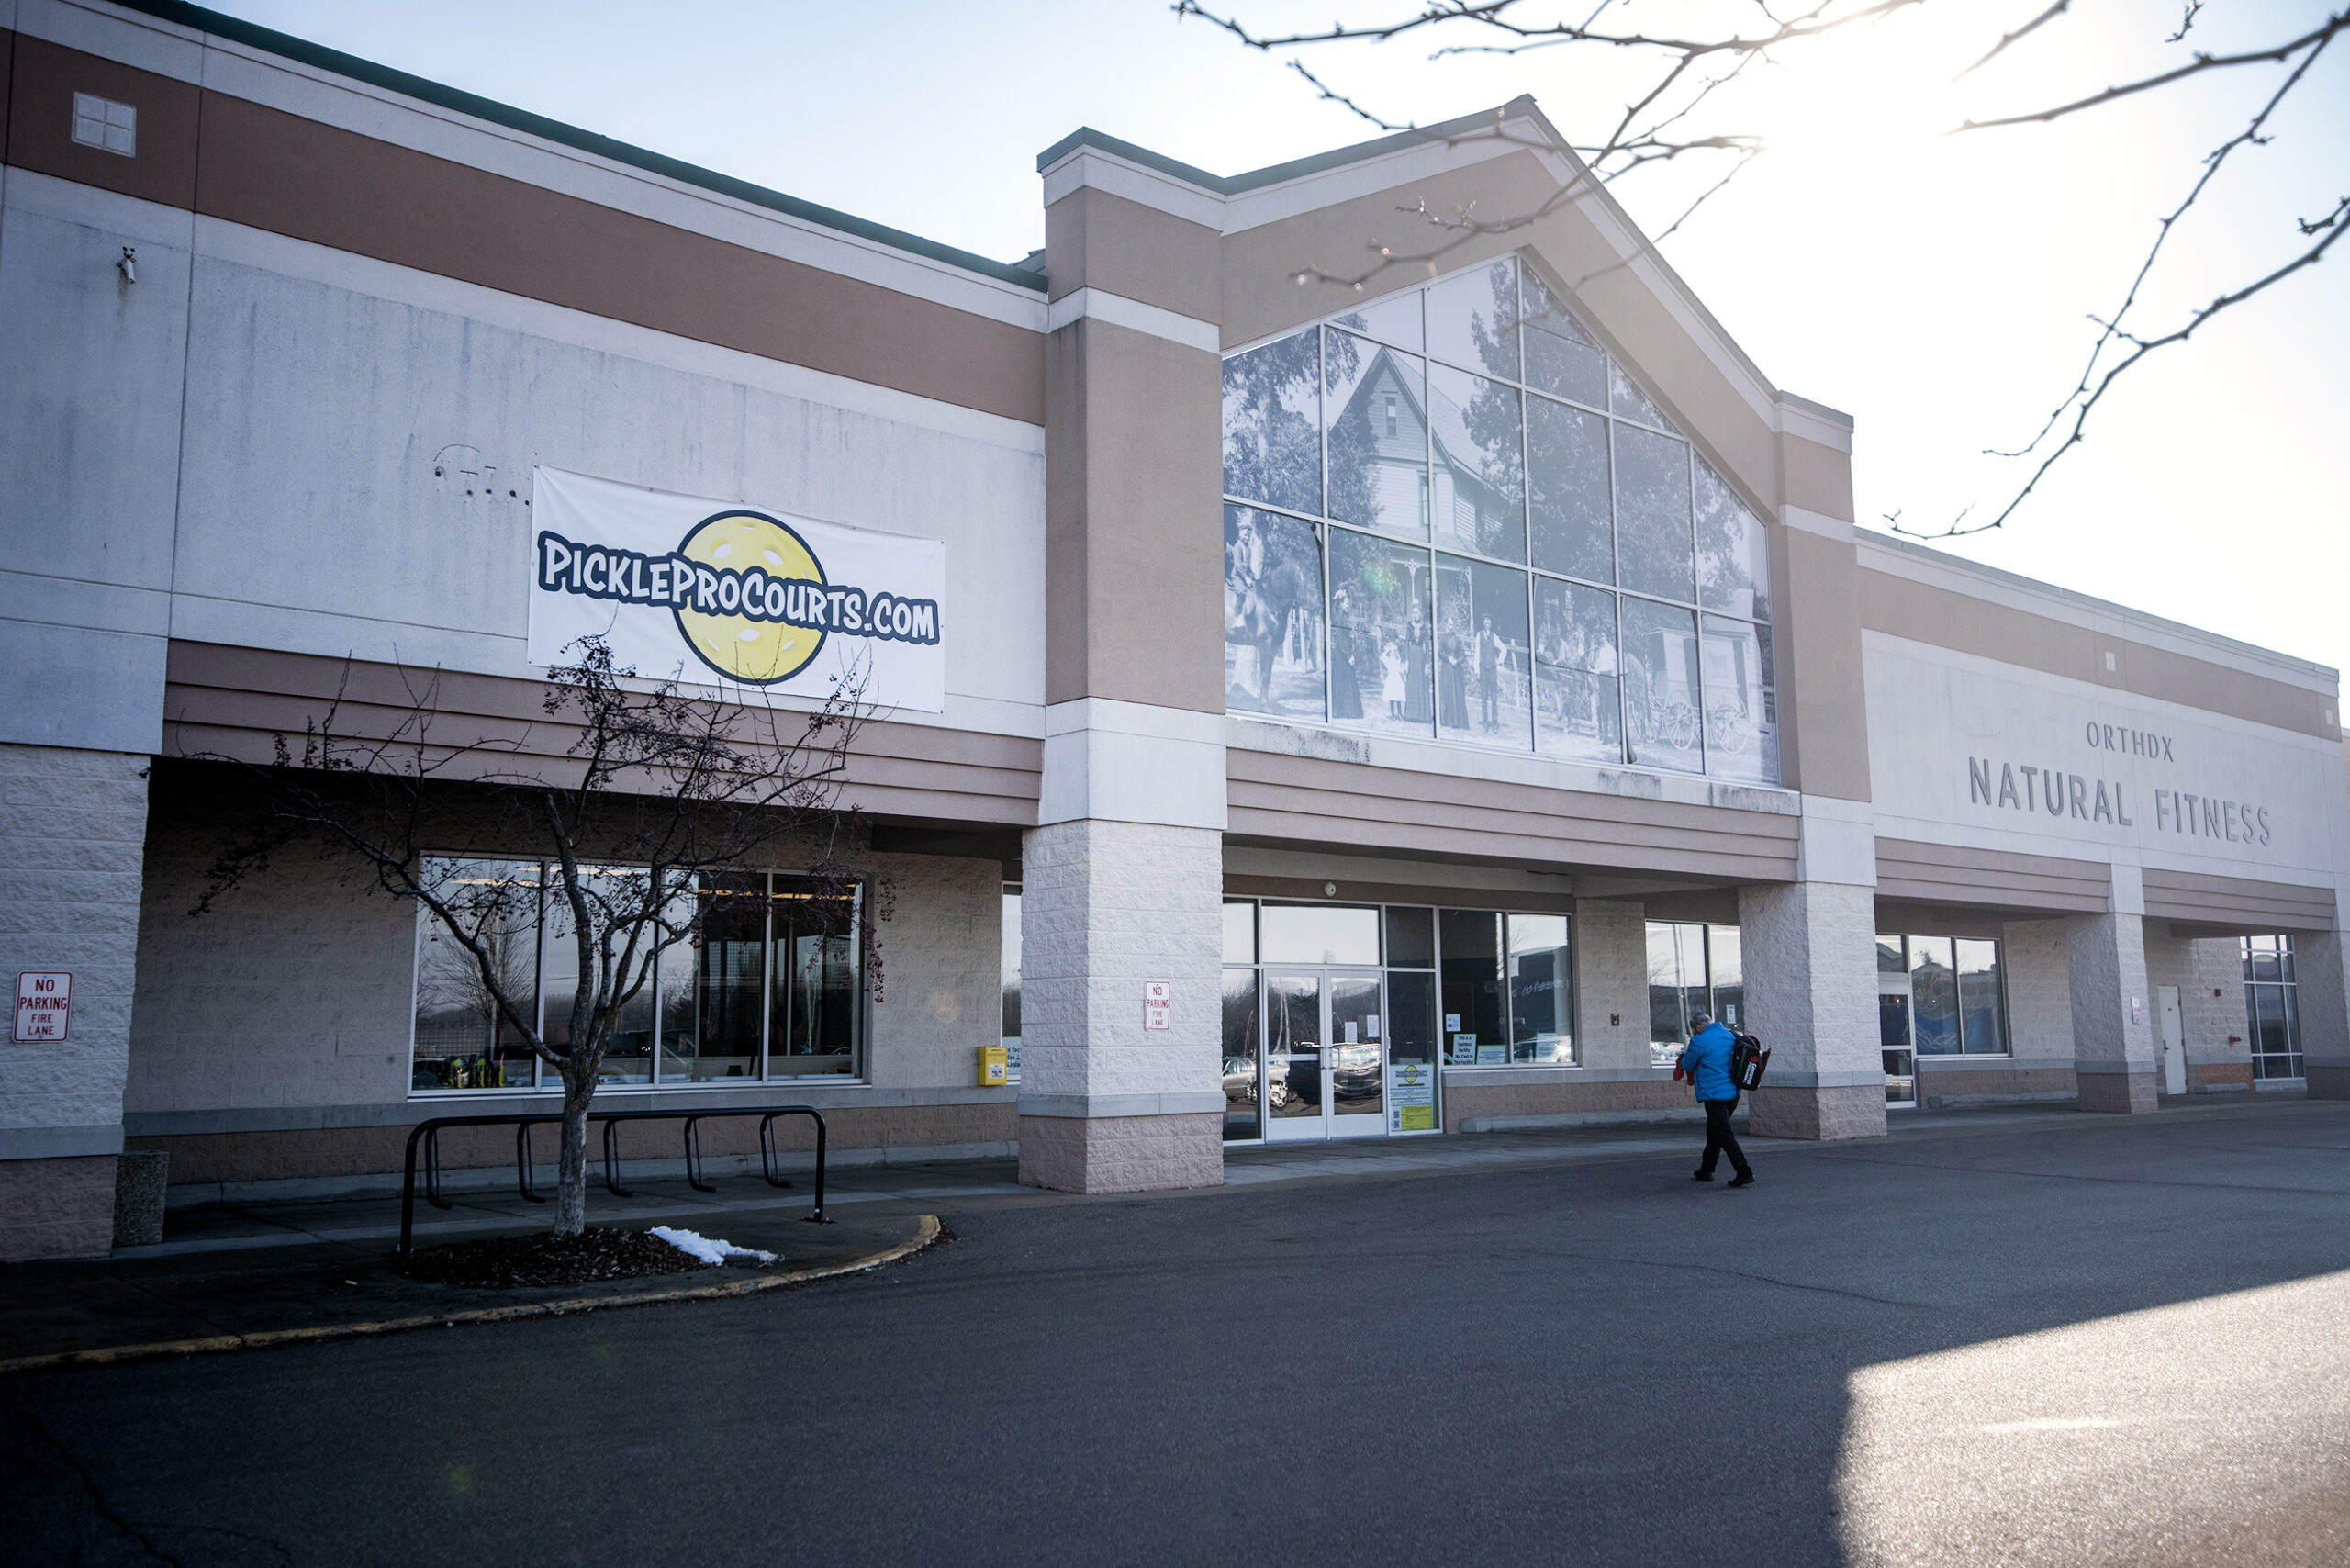 Across Wisconsin, developers are finding ways to transform shuttered big-box stores and malls